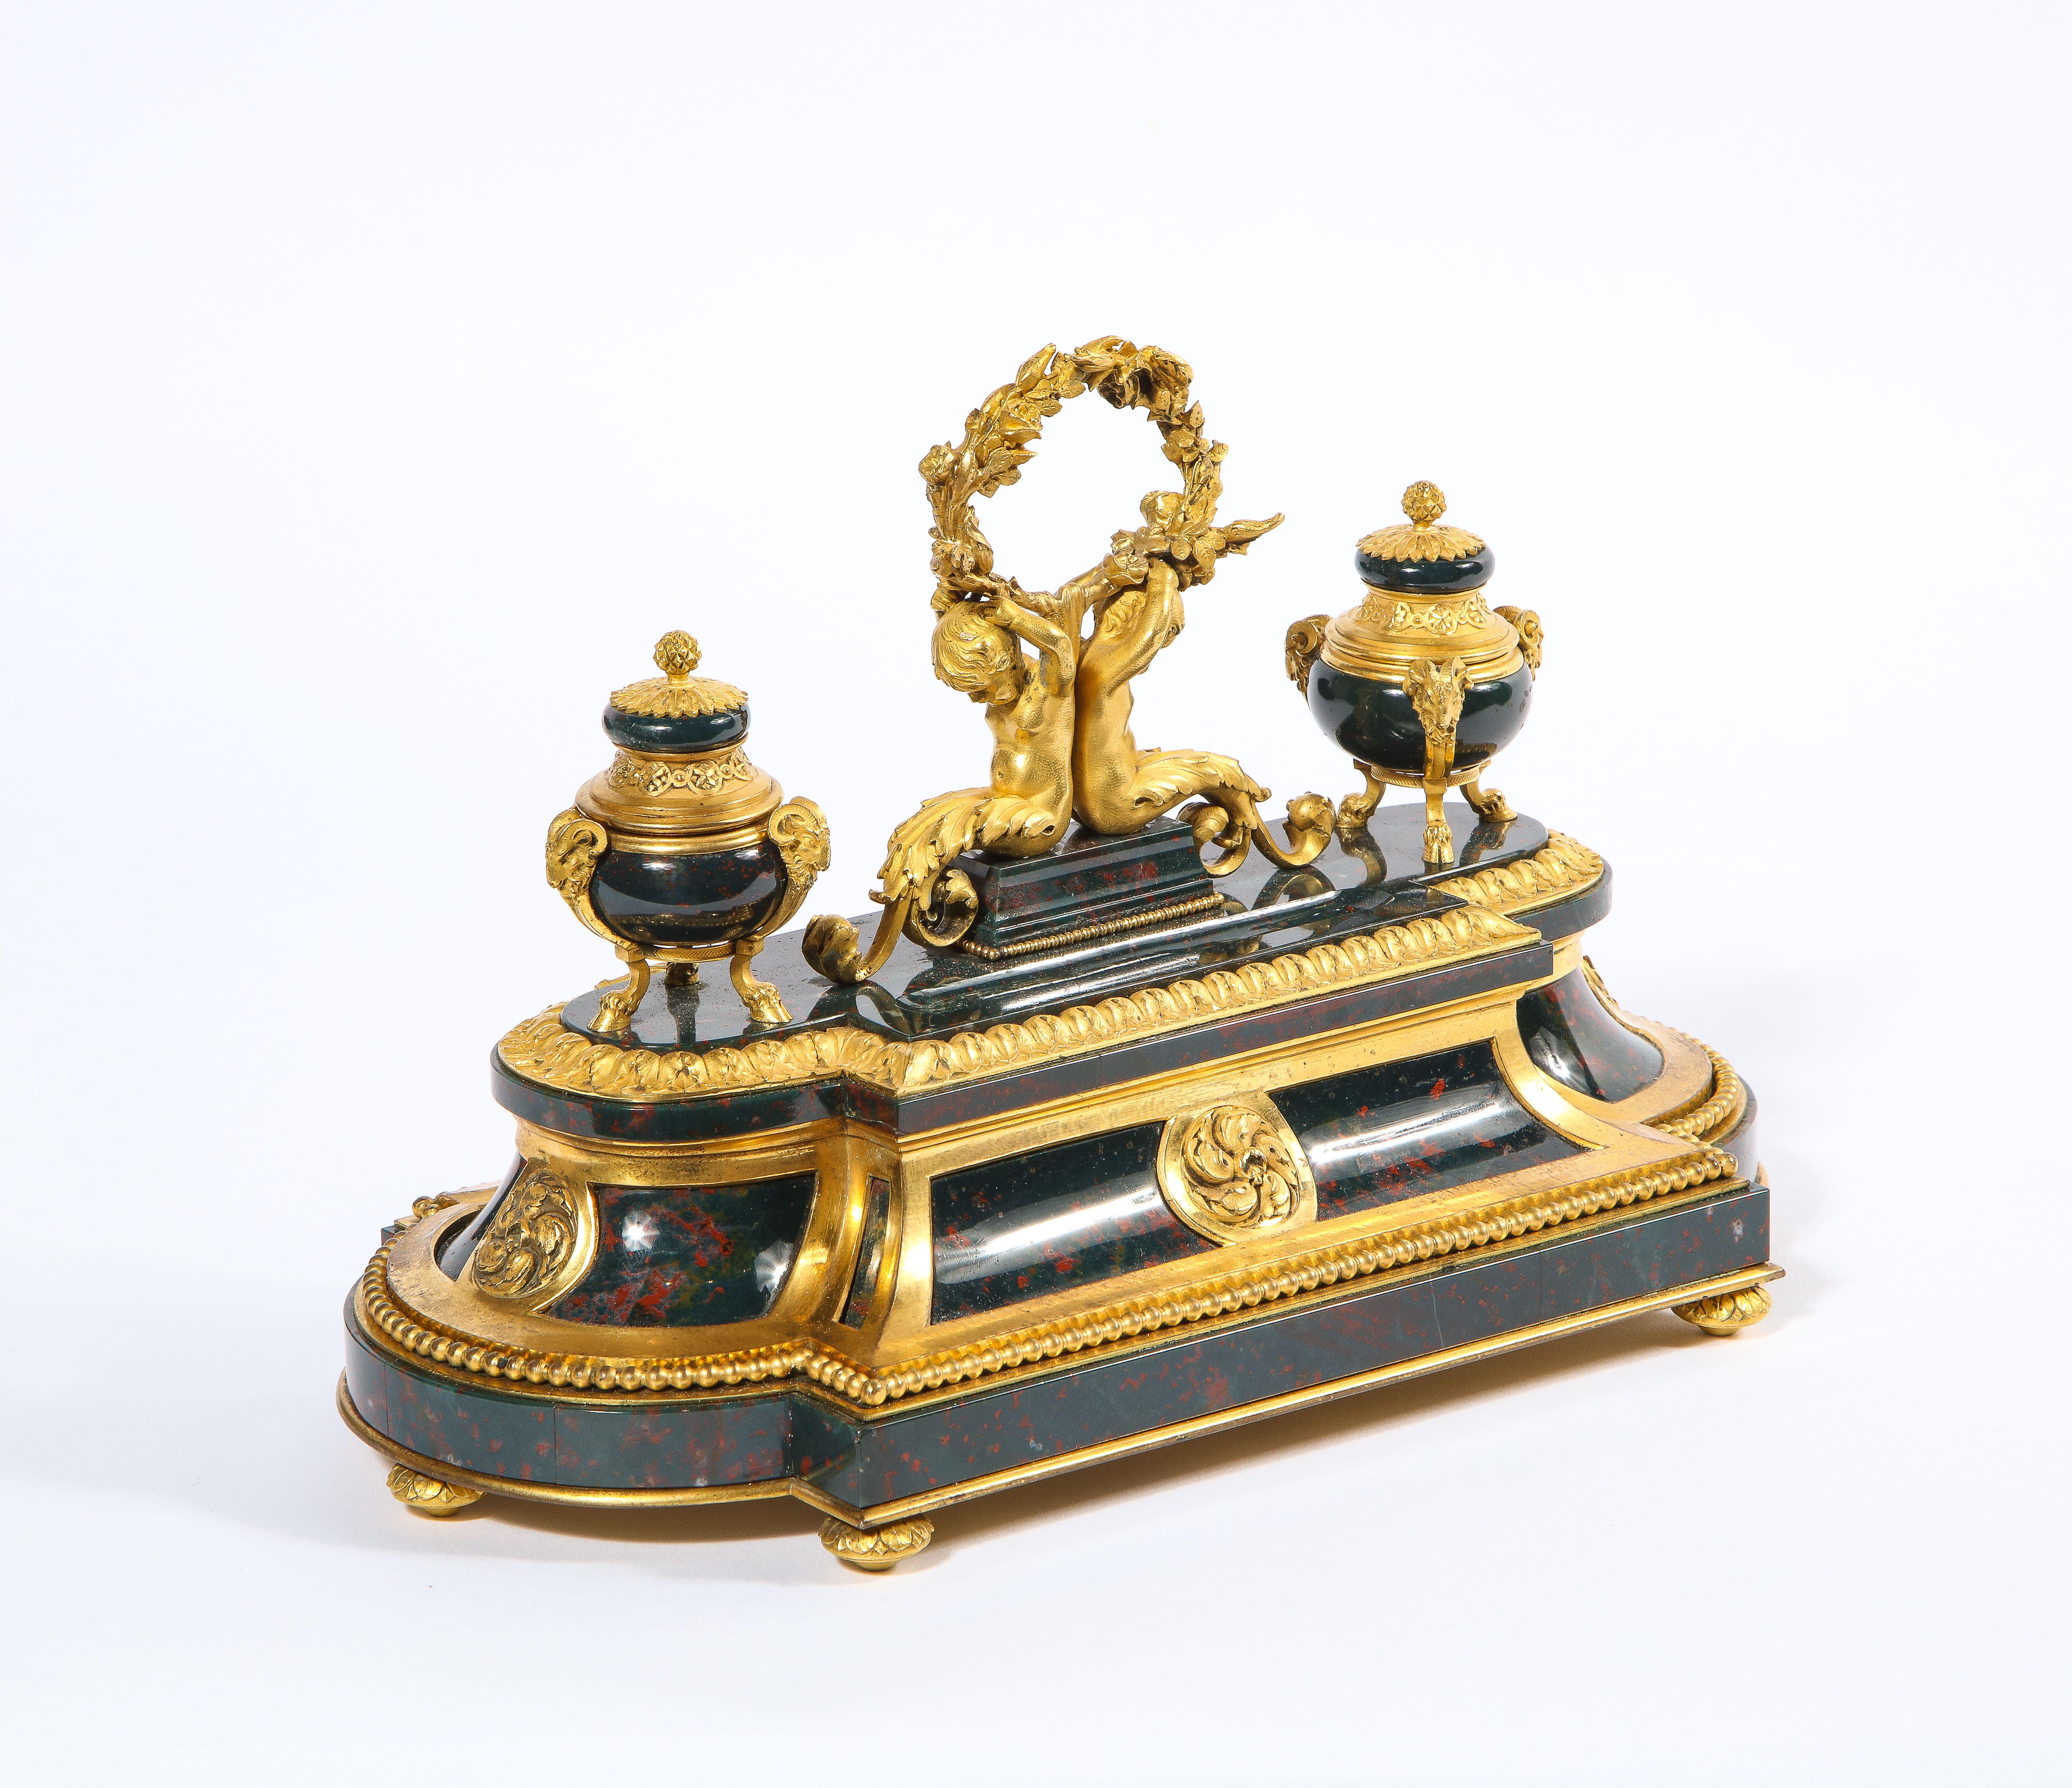 Napoleon III An Exquisite and Rare French Louis XVI Style Ormolu-Mounted Bloodstone Inkwell For Sale